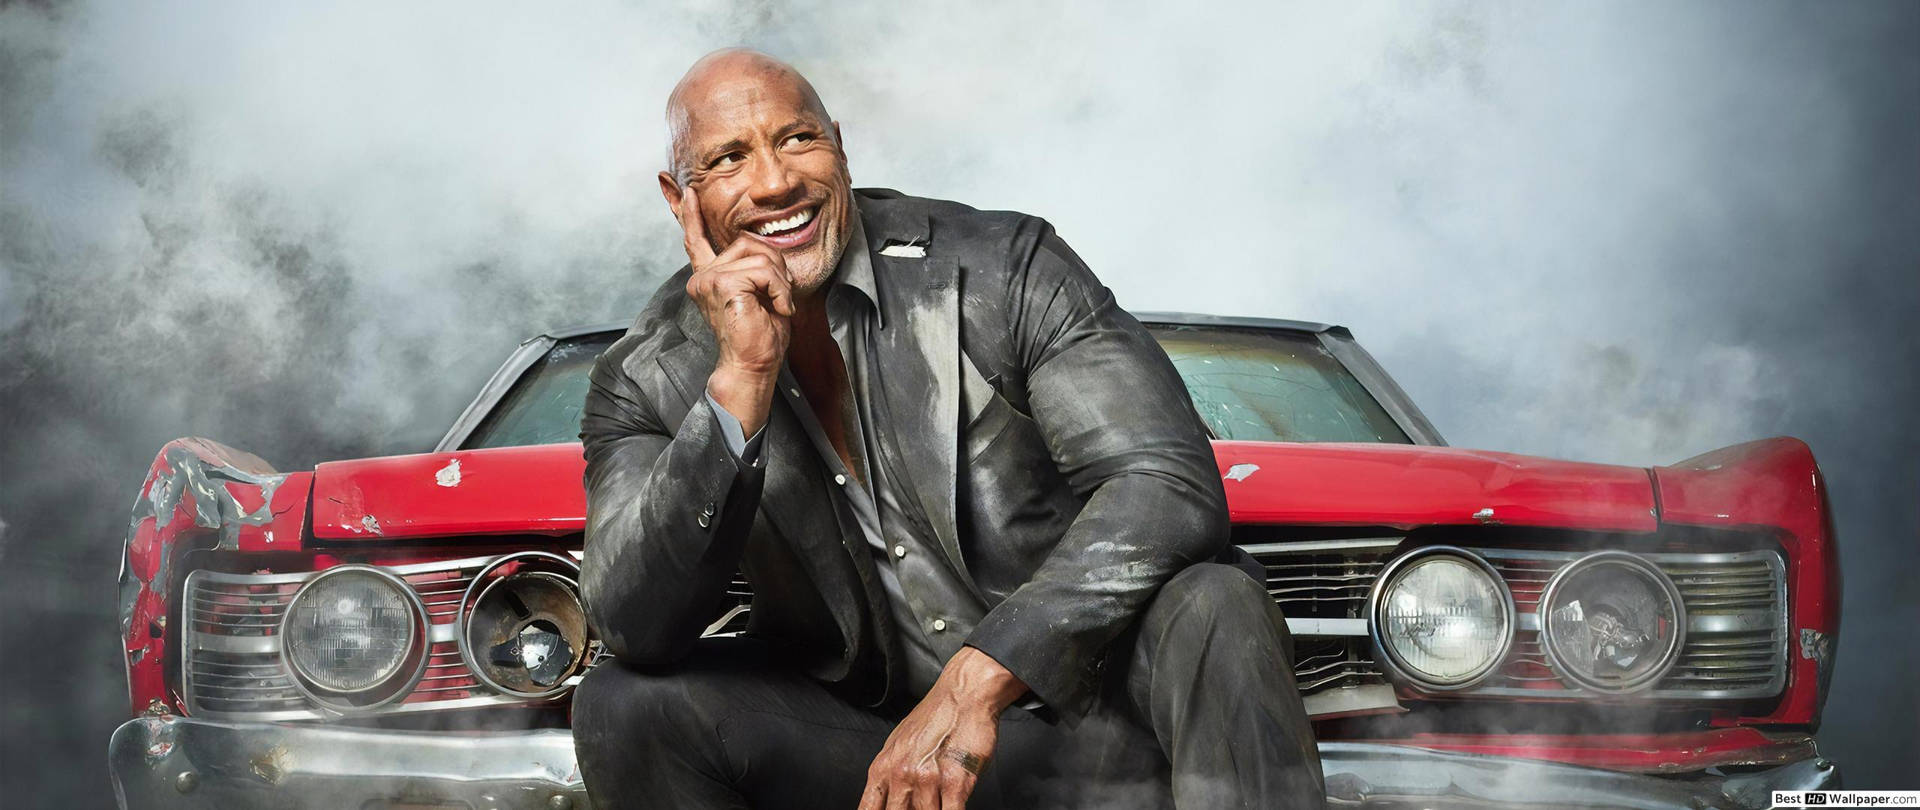 Fast And Furious Hobbs Broken Car Background